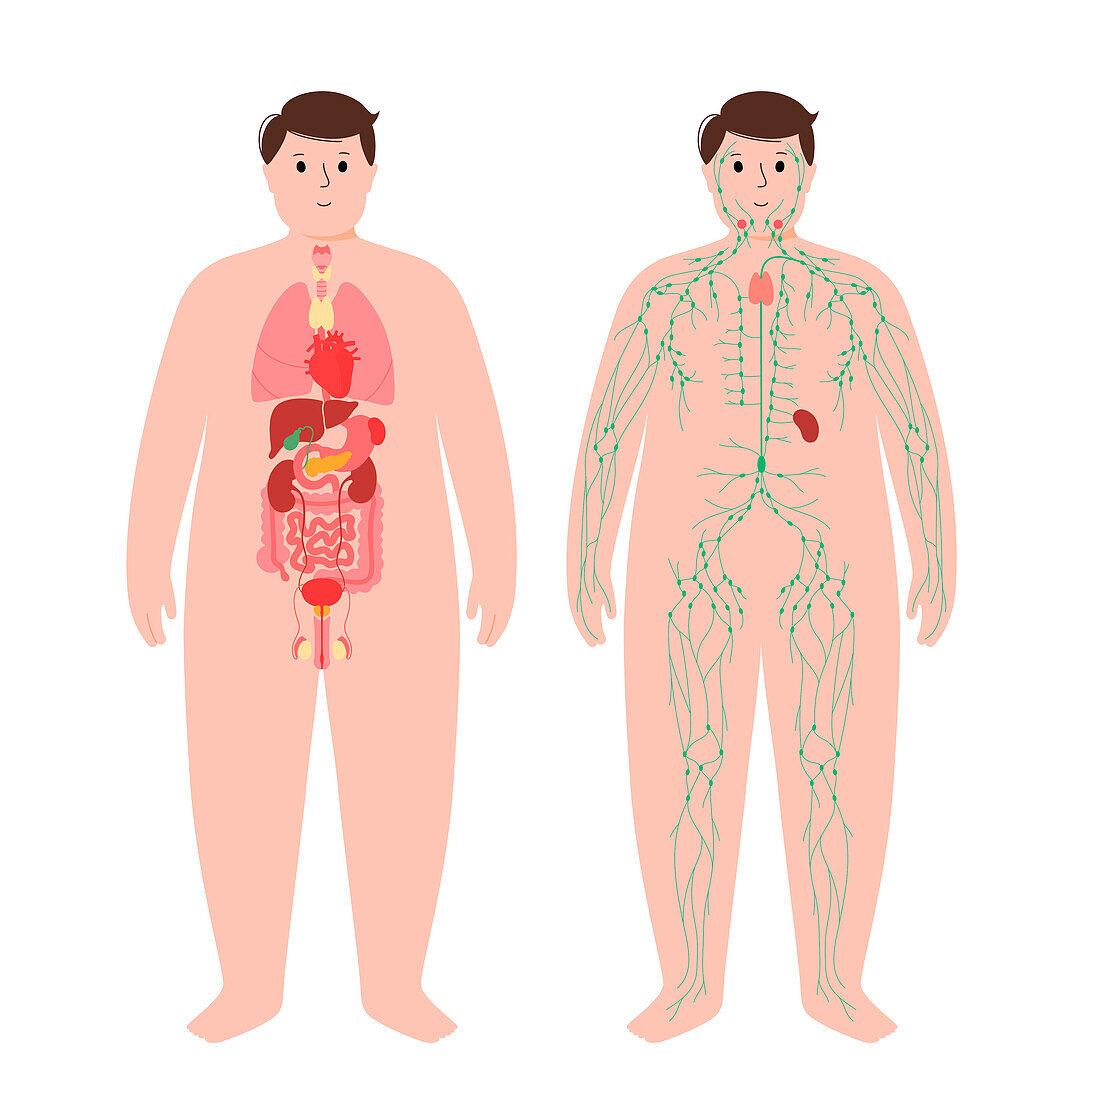 Organs and lymphatic system, illustration